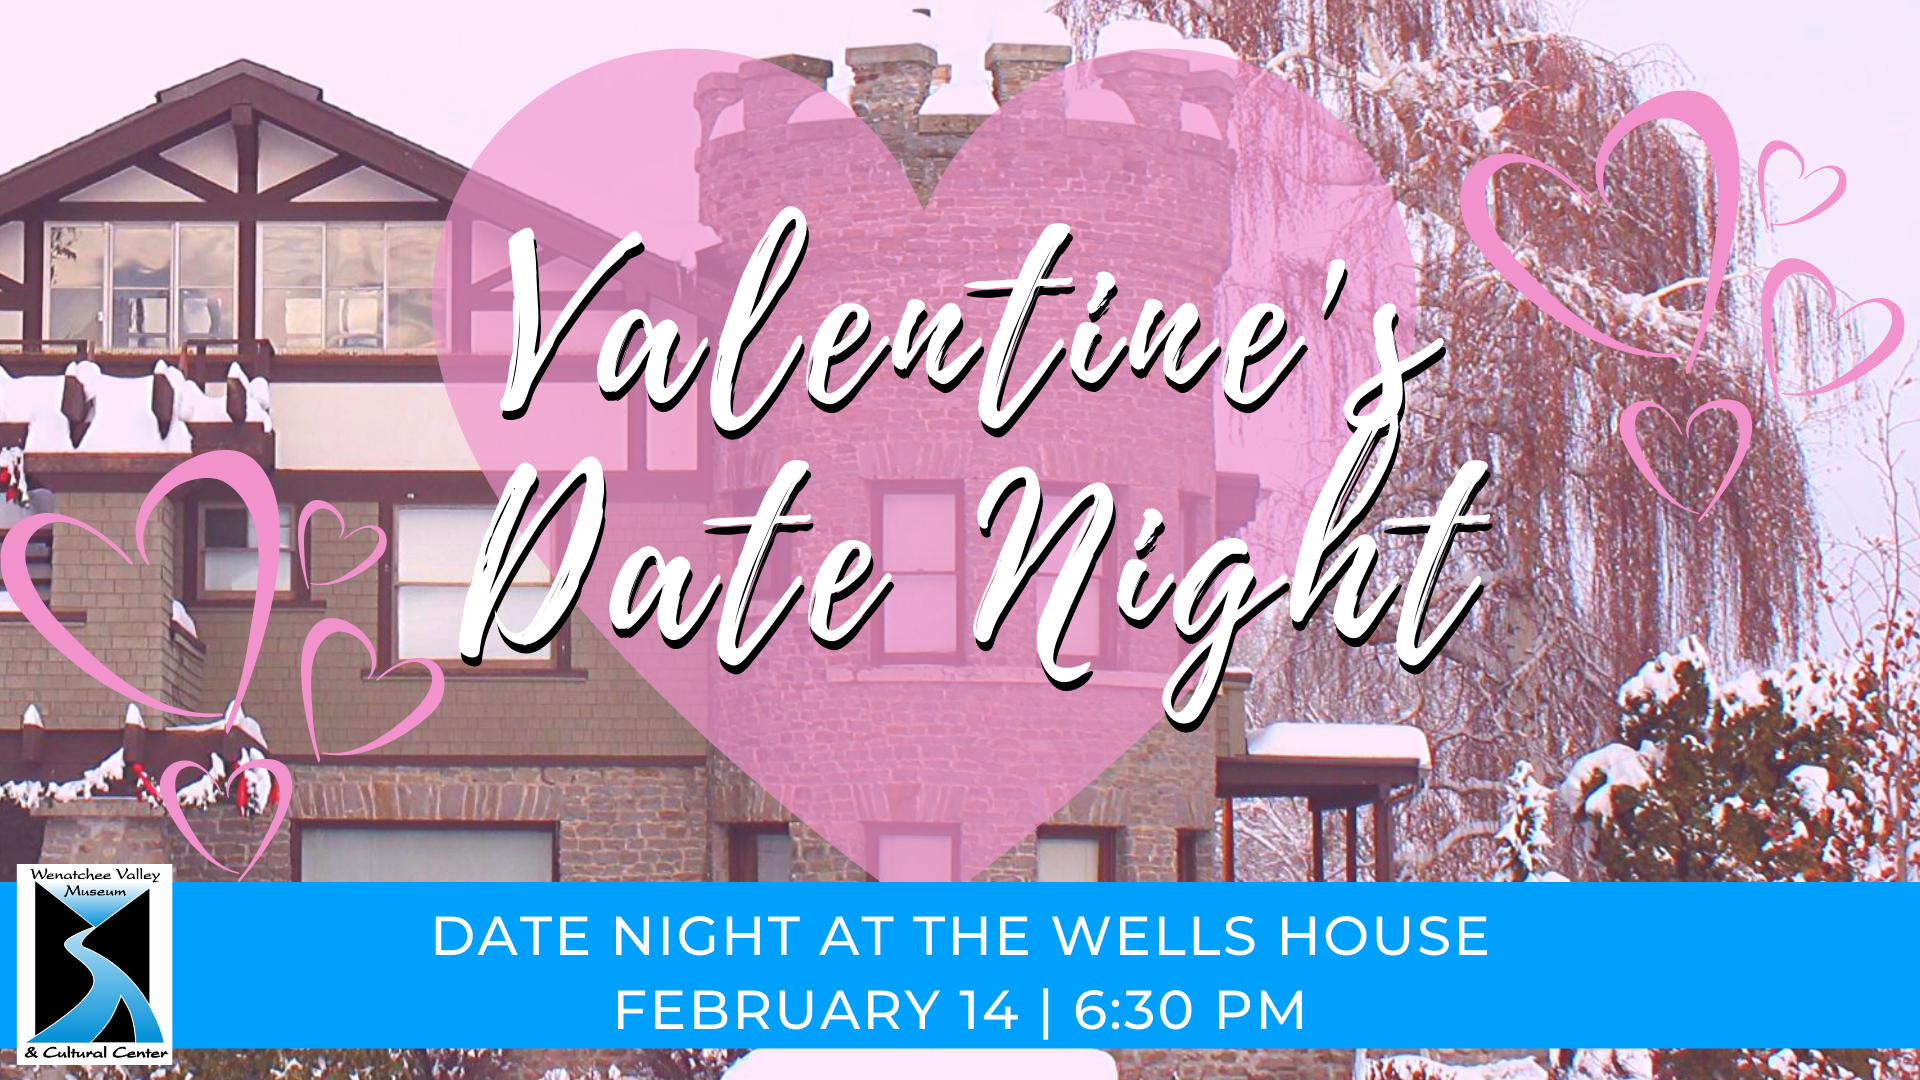 Join us for Valentine's Day at the Wells House